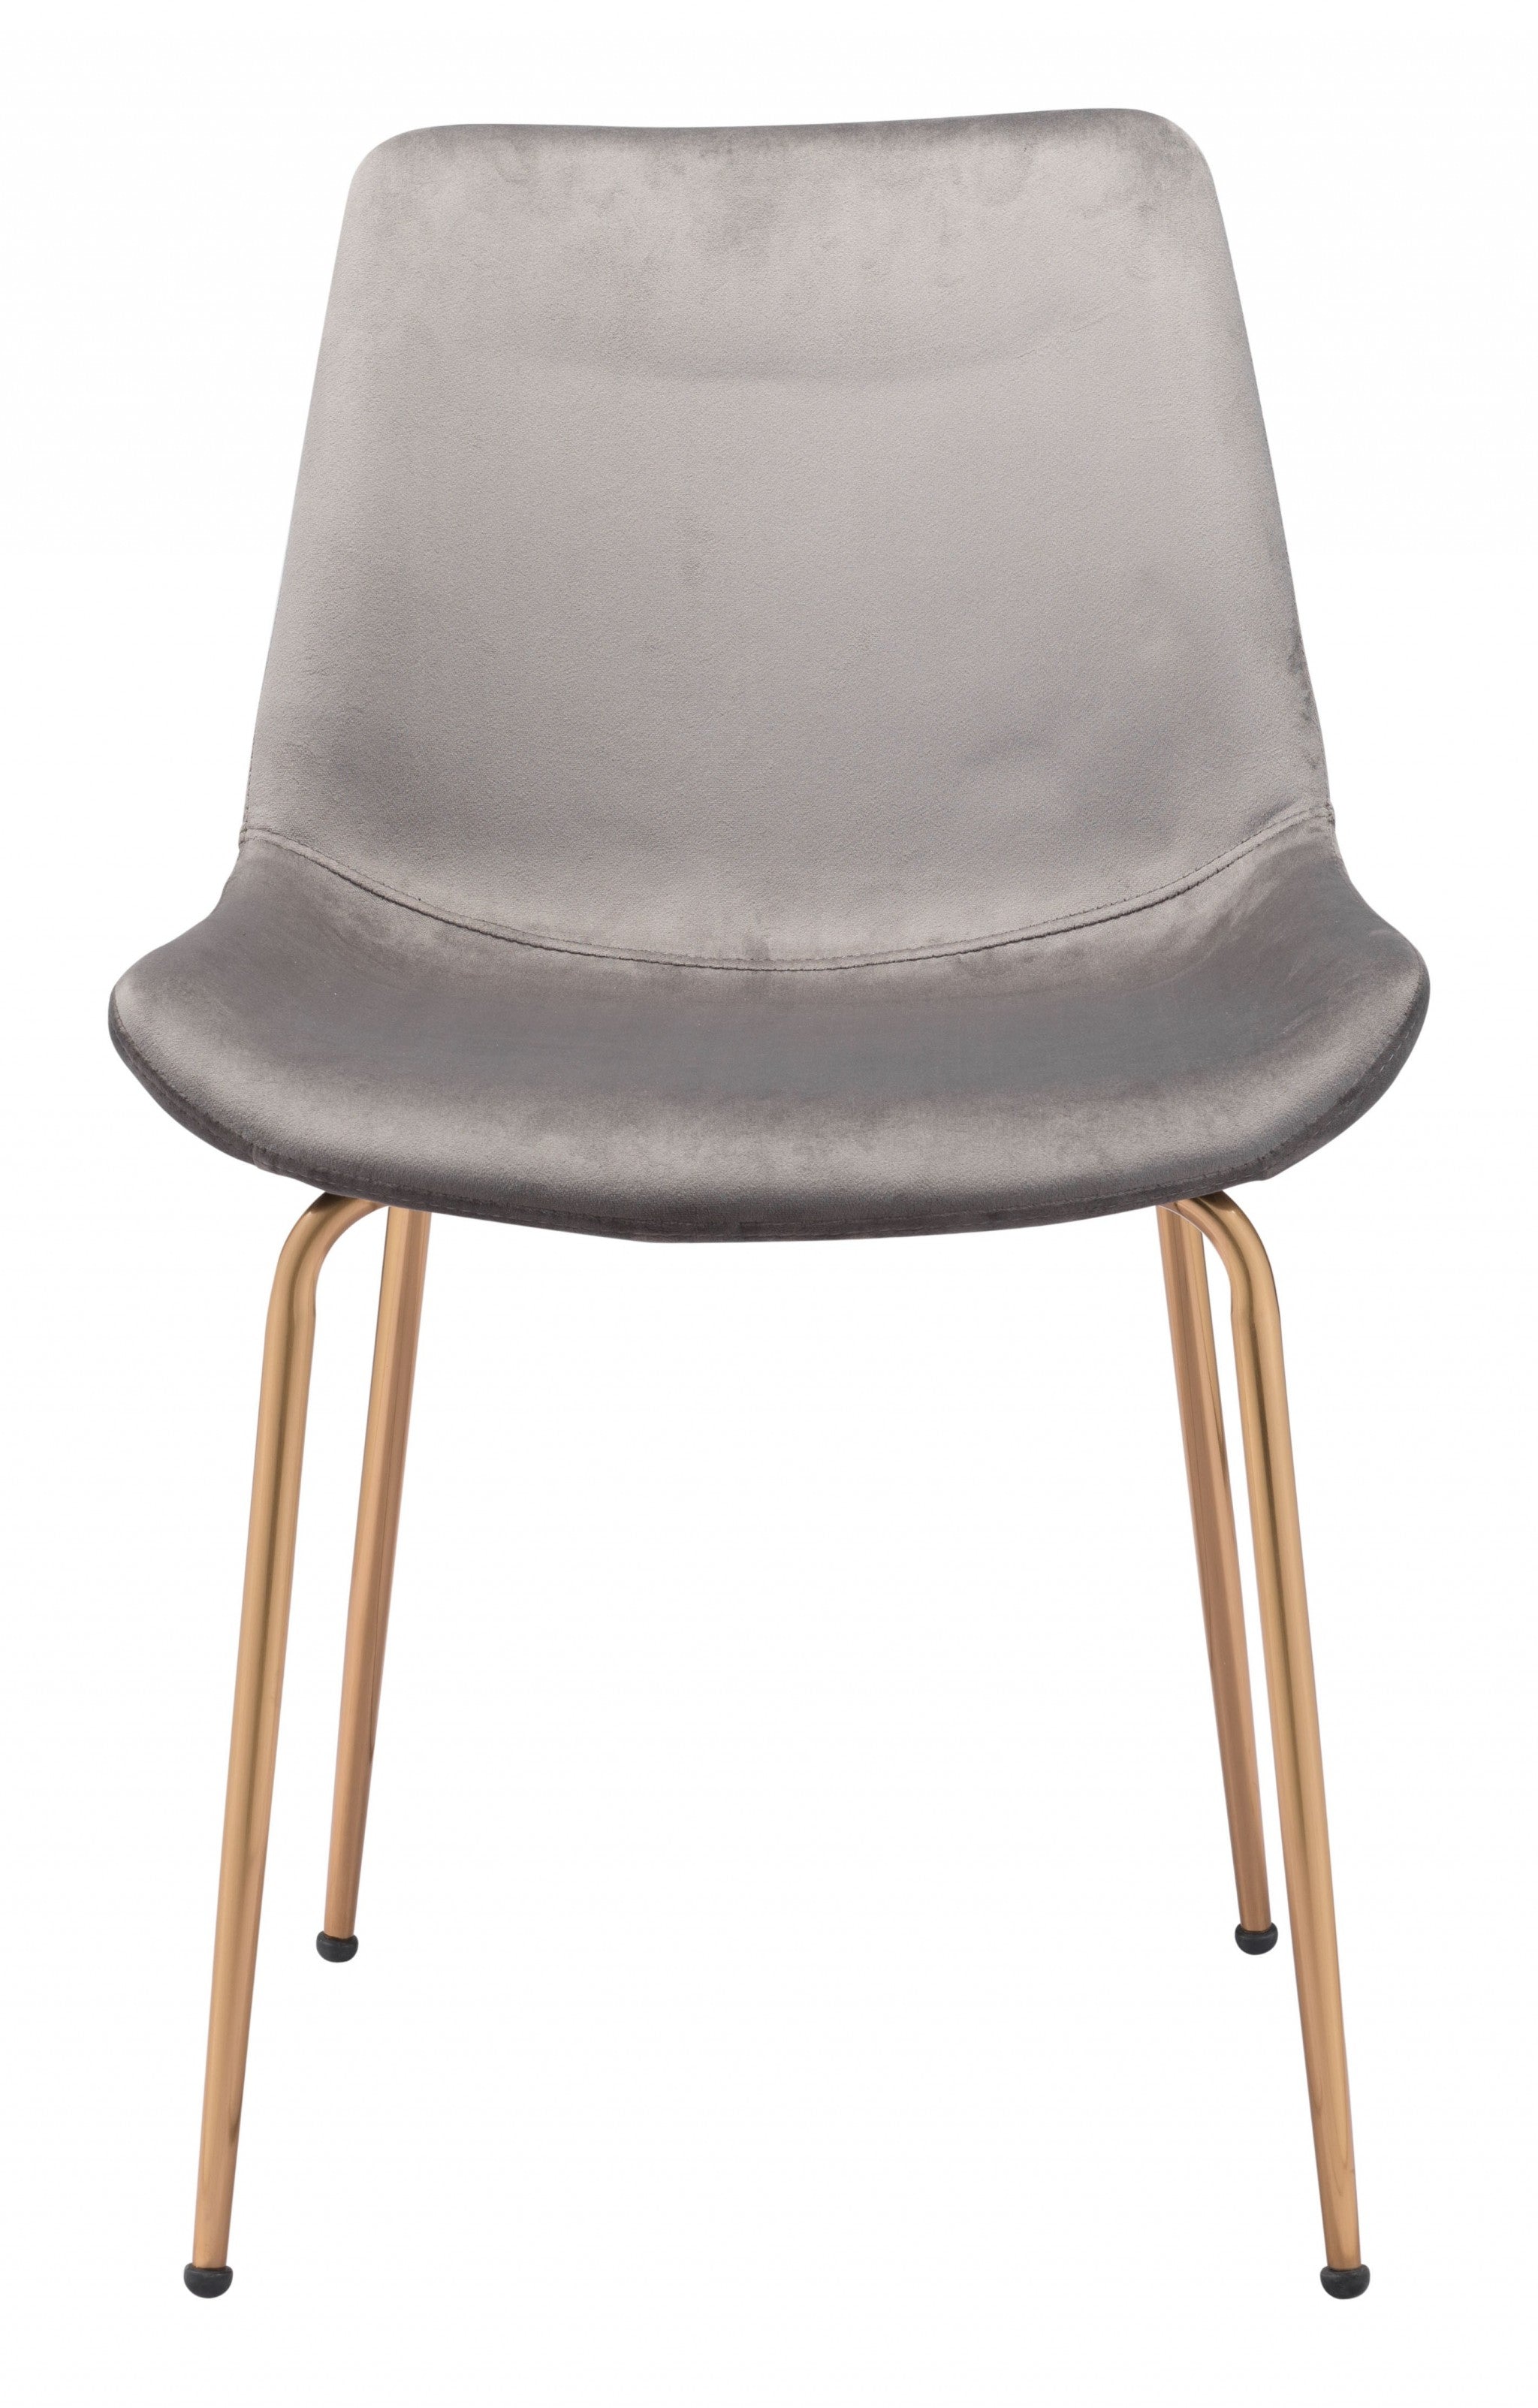 Set of Two Gray and Gold Upholstered Velvet Dining Side Chairs